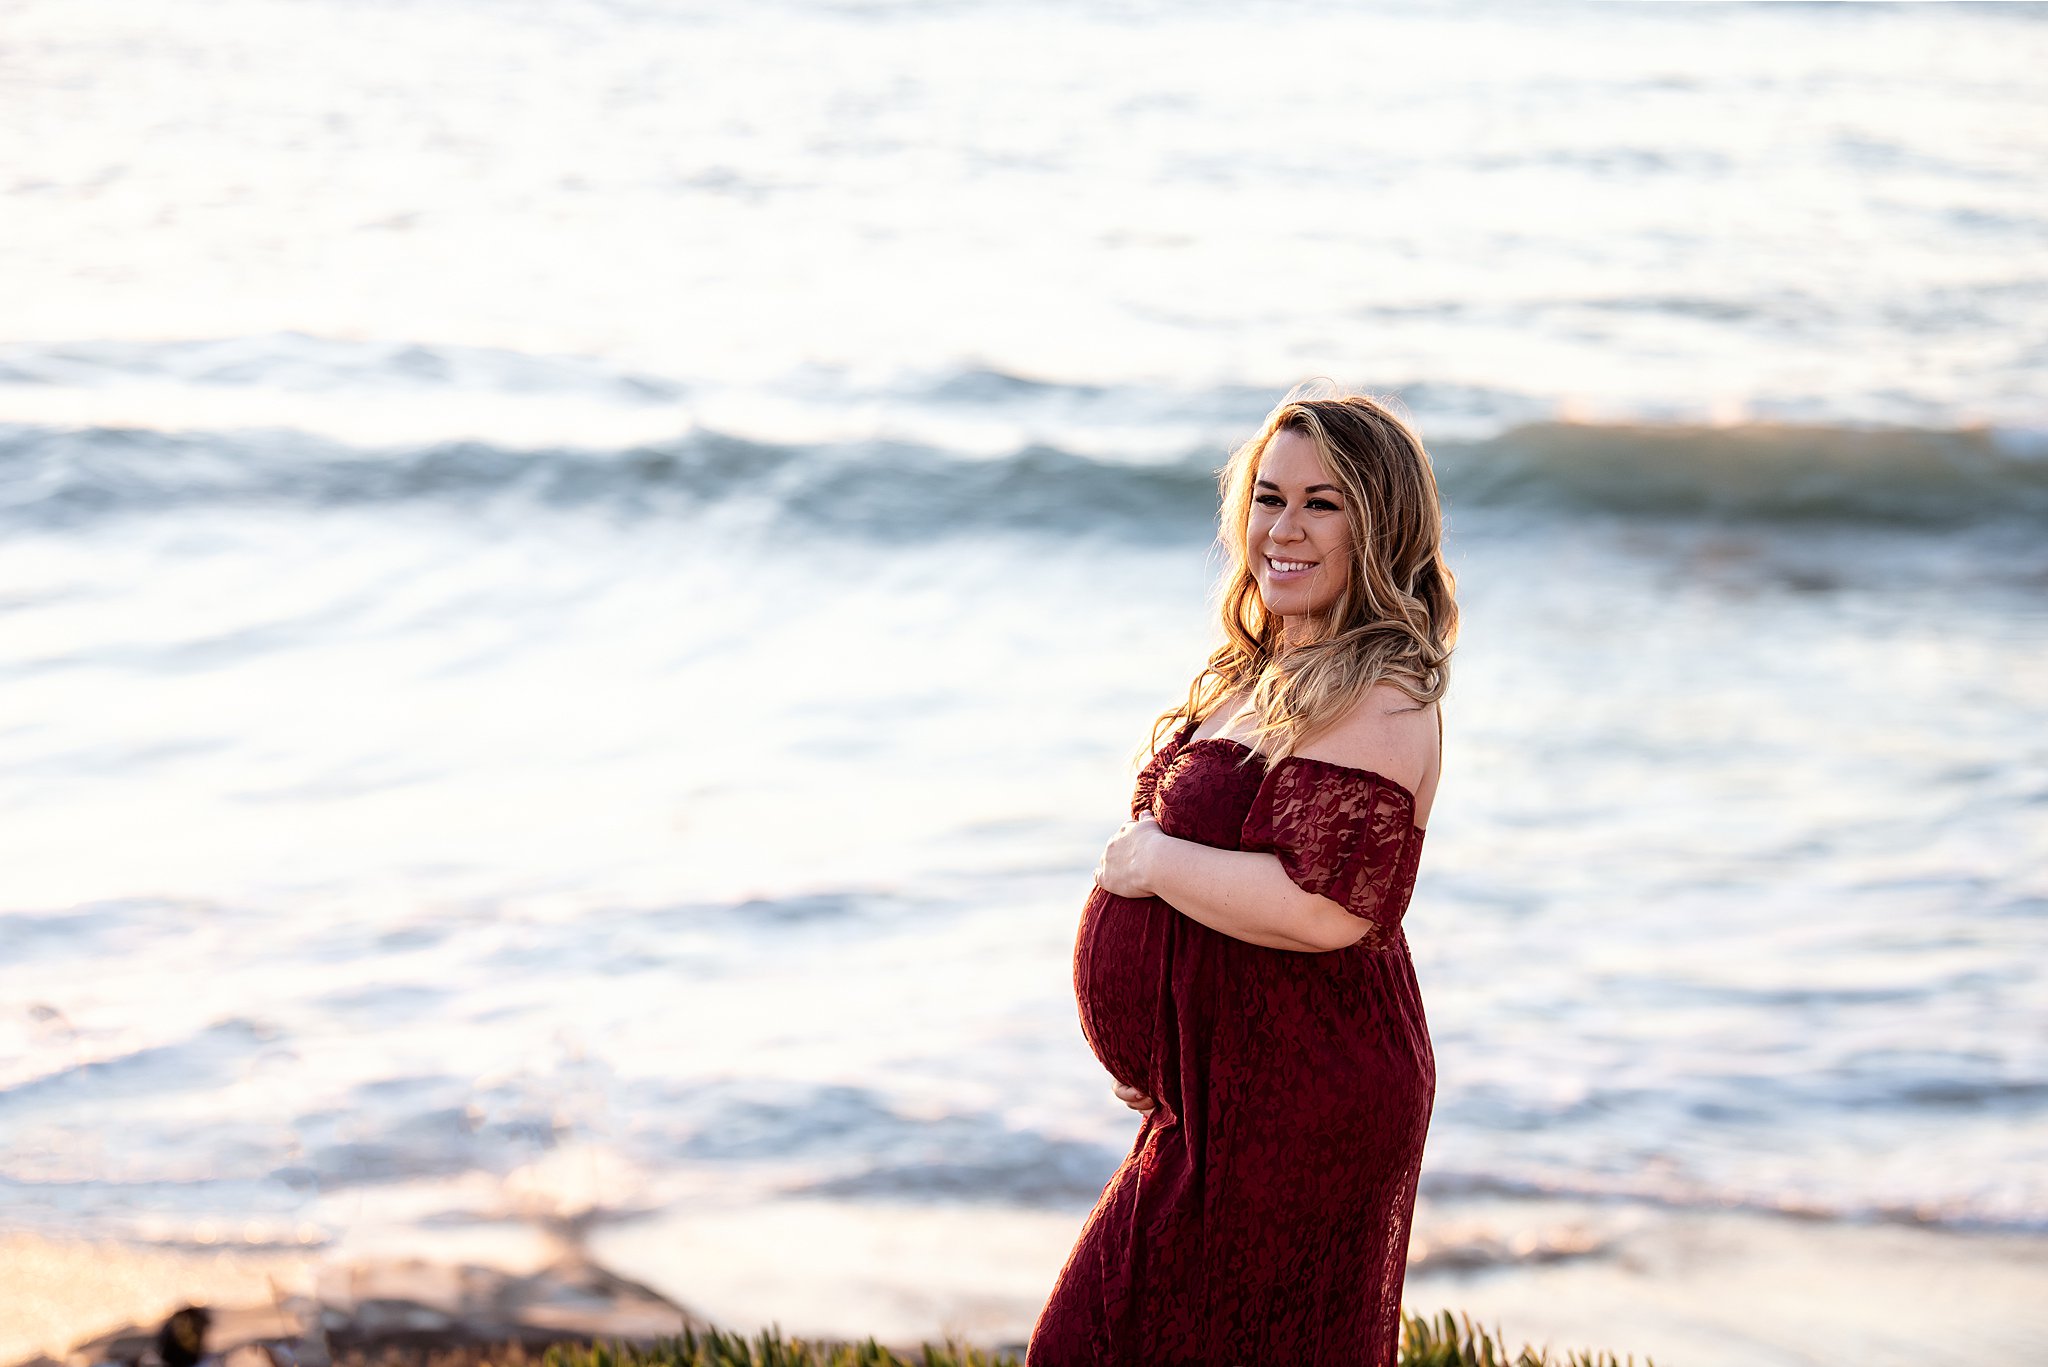 A mother to be in a dark red lace maternity dress stands on a beach while holding her bump Sharp Mary Birch Hospital for Women & Newborns